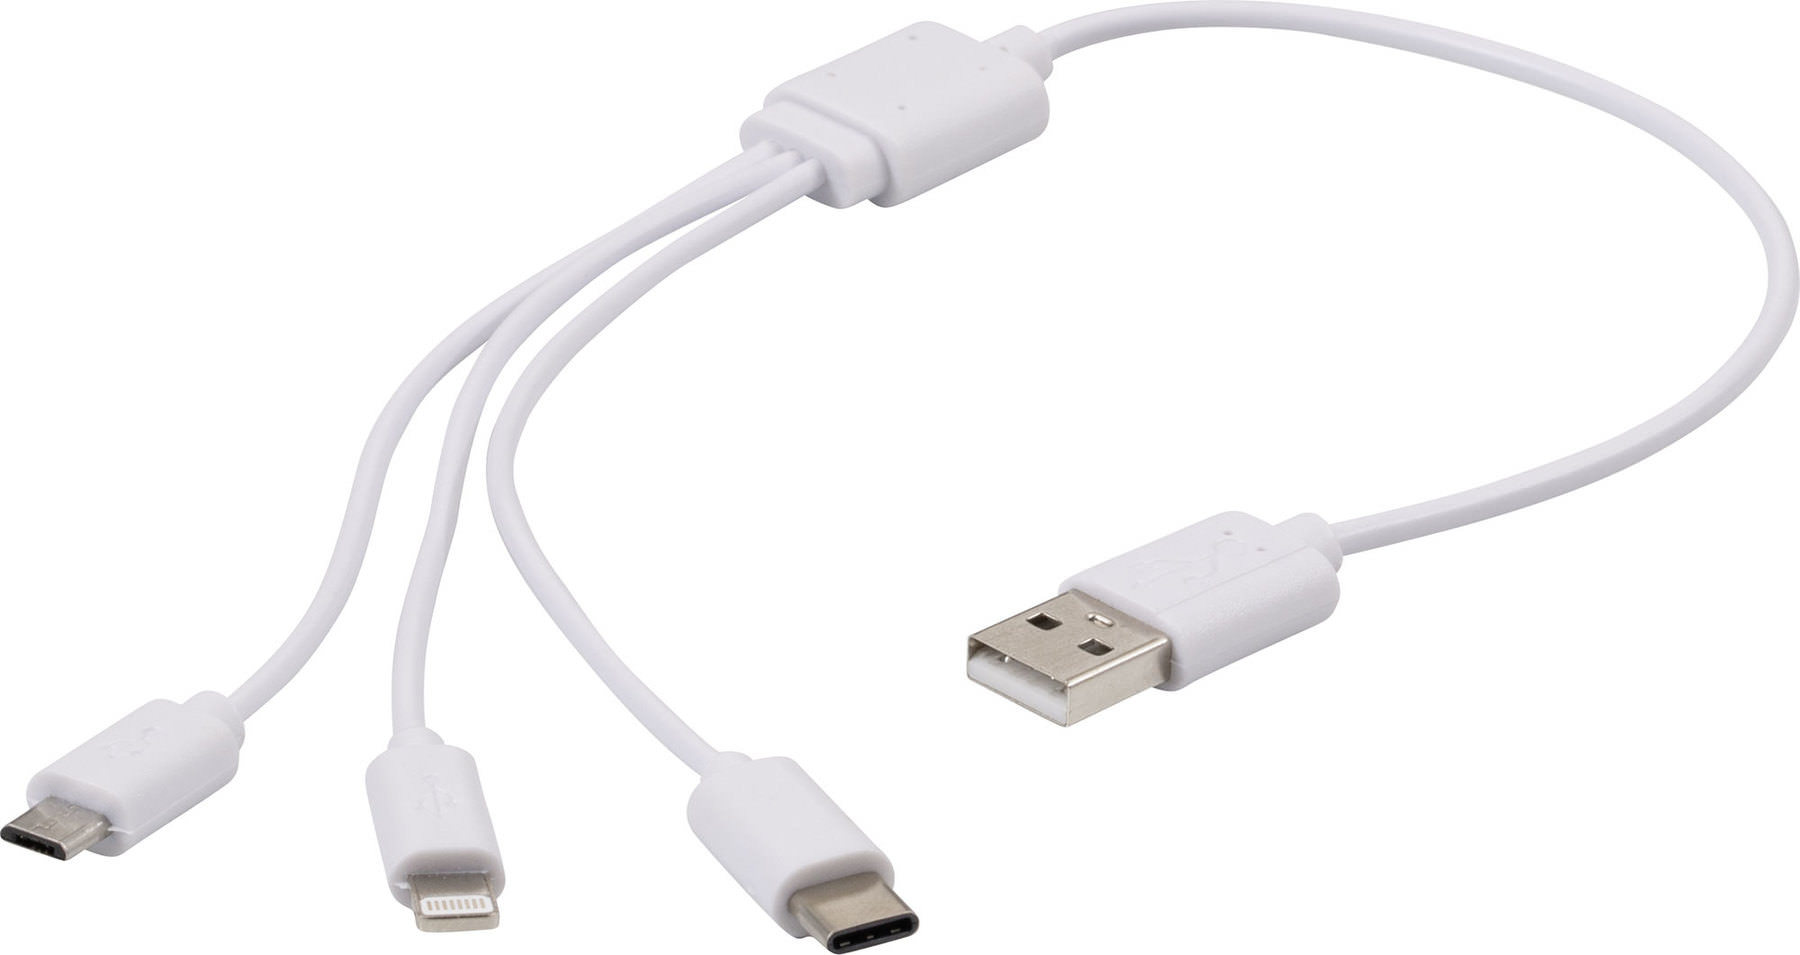 Multi USB Charging Cable,3-in-1 Fast Charge Cable 3ft Multiple Ports Devices USB Charging Cord with iOS/Type C/Micro USB Connectors 5 Vintage Bohemian Flower 